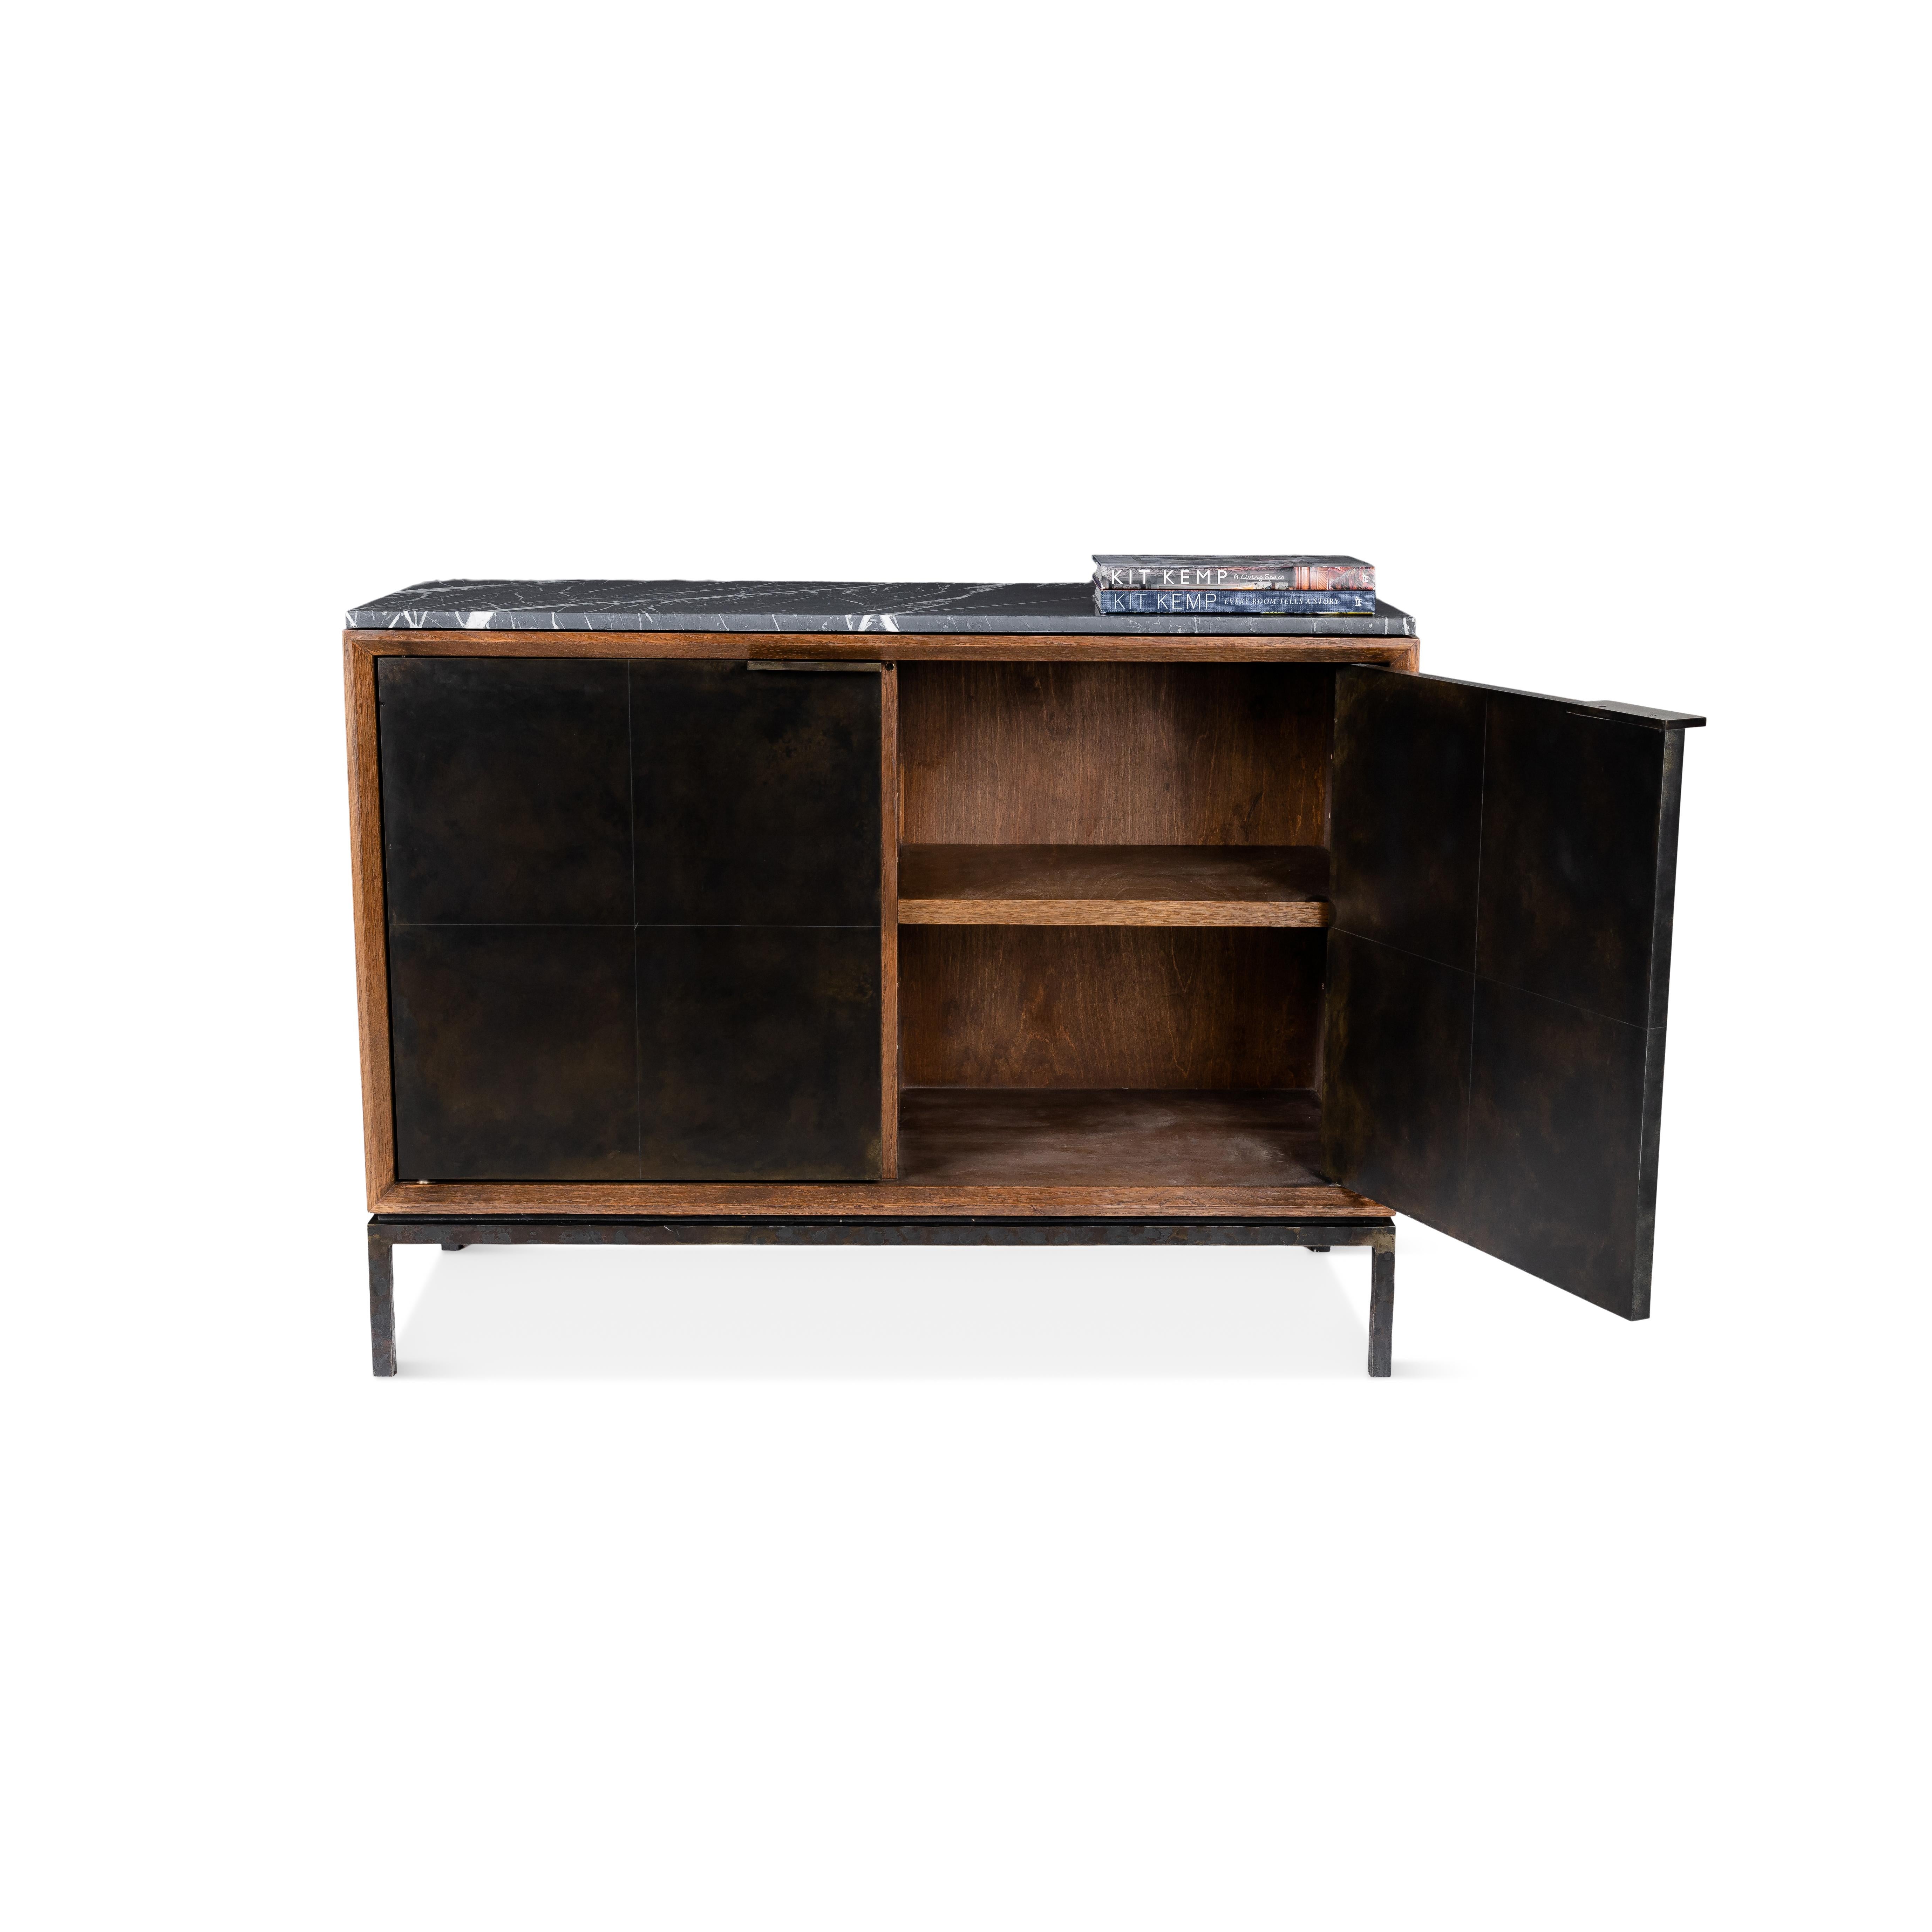 Server with two aged bronze zinc doors, wood body, and honed nero marquino top.

This item is crafted from natural materials. Coloring and detailing may vary, adding to its uniqueness.

Dimensions, stone type and metal finish can be